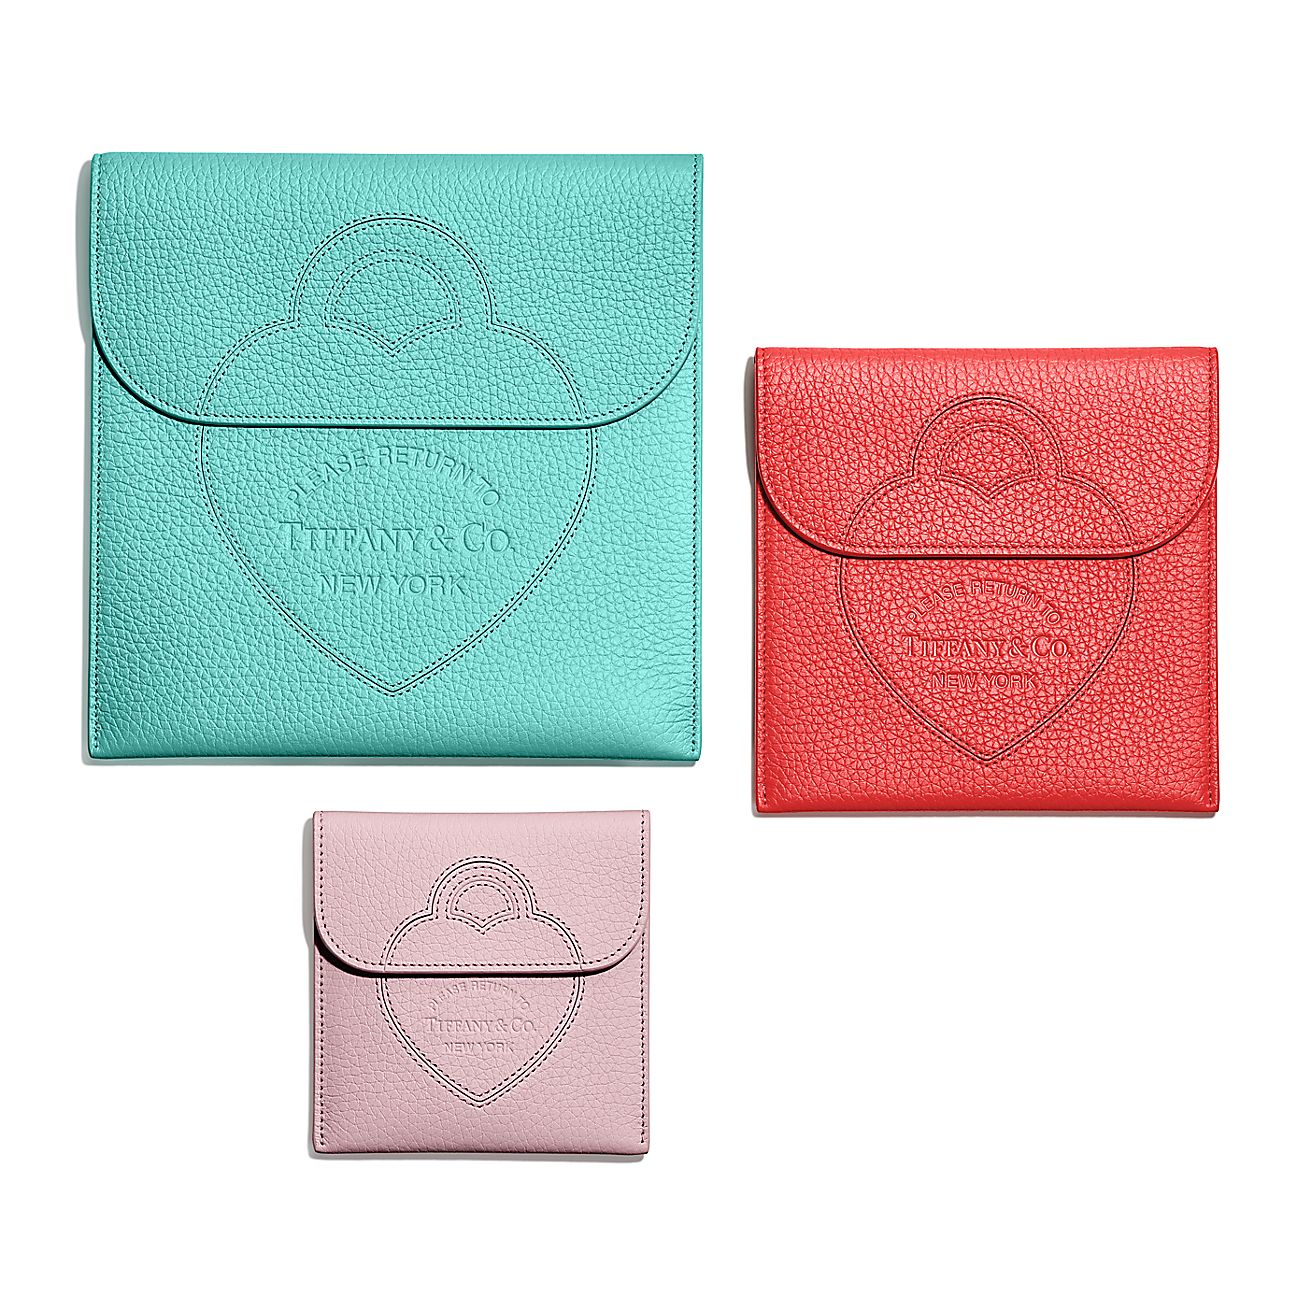 Return to Tiffany® Pouch Set in Multi-colored Leather, Set of